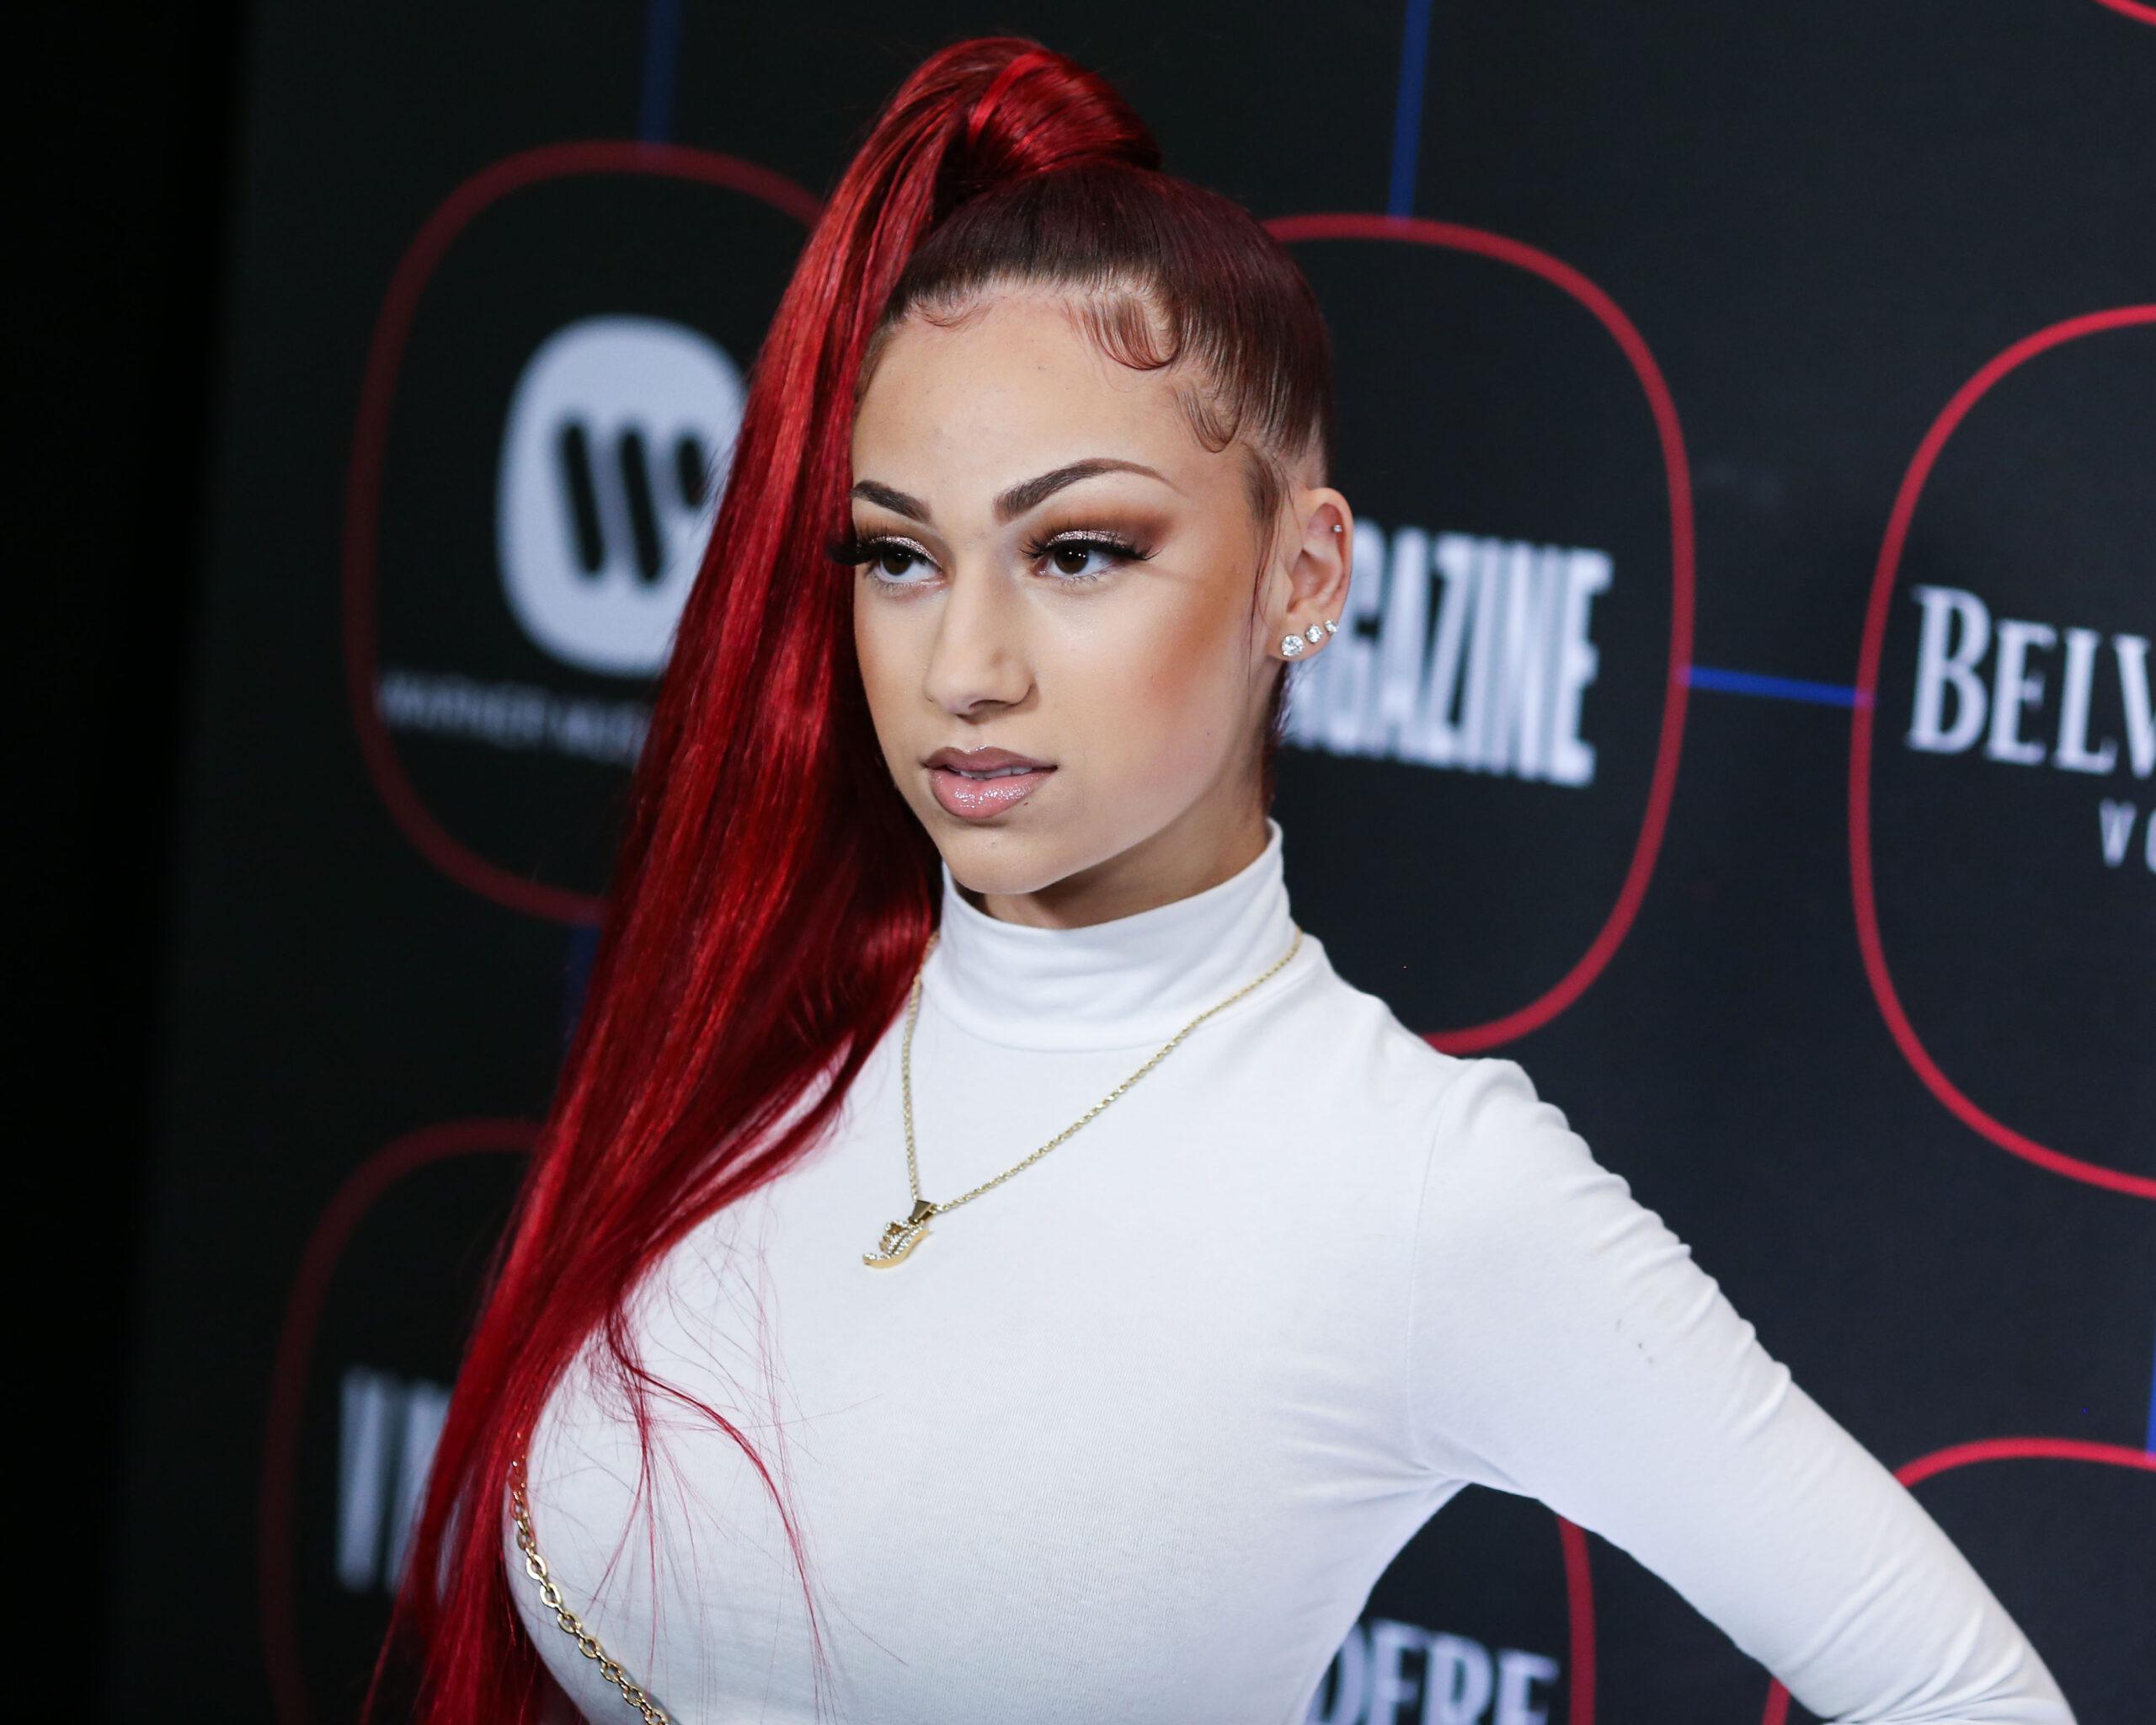 Warner Music Pre-Grammy Party 2019 held at The NoMad Hotel Los Angeles on February 7, 2019 in Los Angeles, California, United States. 07 Feb 2019 Pictured: Bhad Bhabie, Danielle Bregoli.